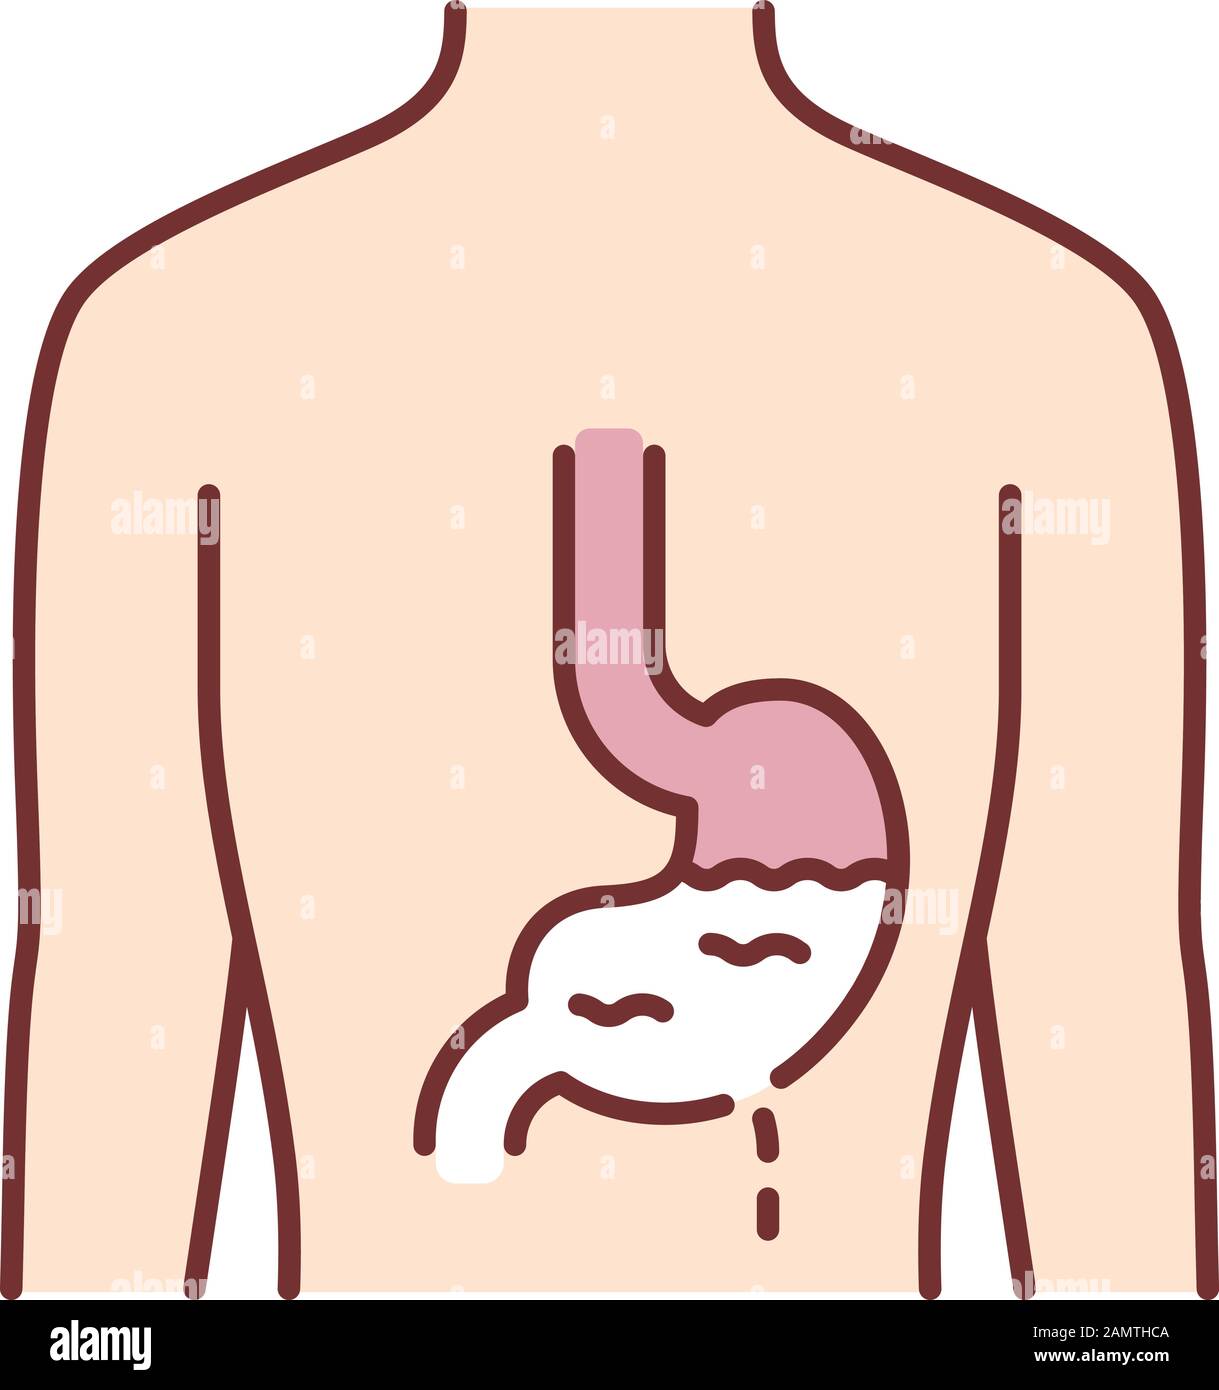 Ill stomach color icon. Gastritis. Sore human organ. People disease. Unhealthy digestive system. Sick internal body part. Gastrointestinal tract. Isol Stock Vector